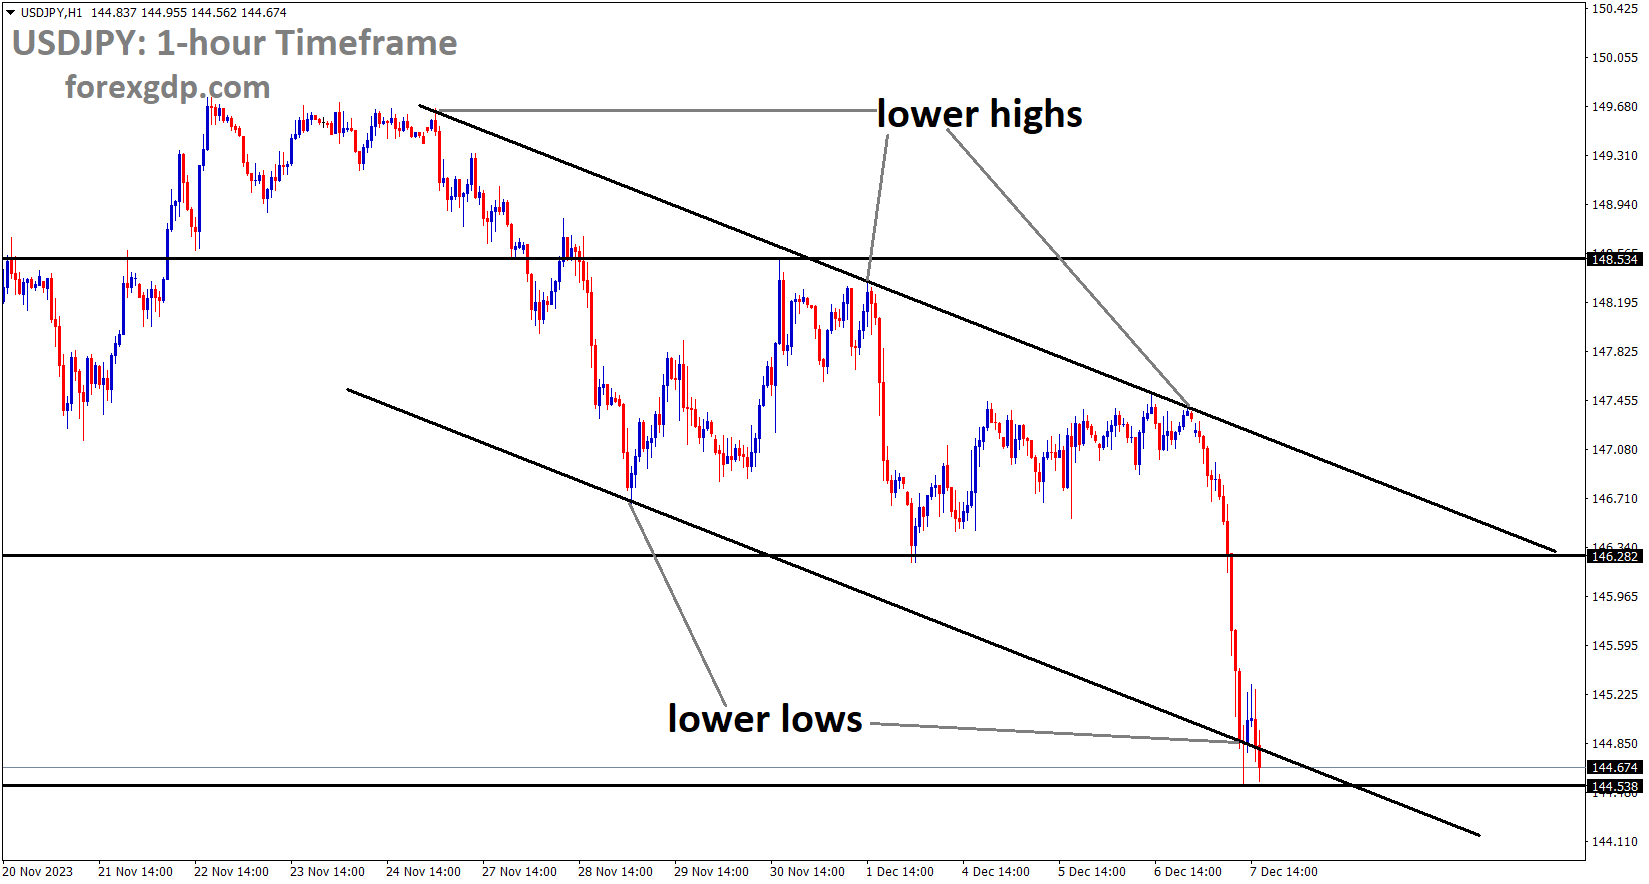 USDJPY is moving in Descending channel and market has reached lower low area of the channel